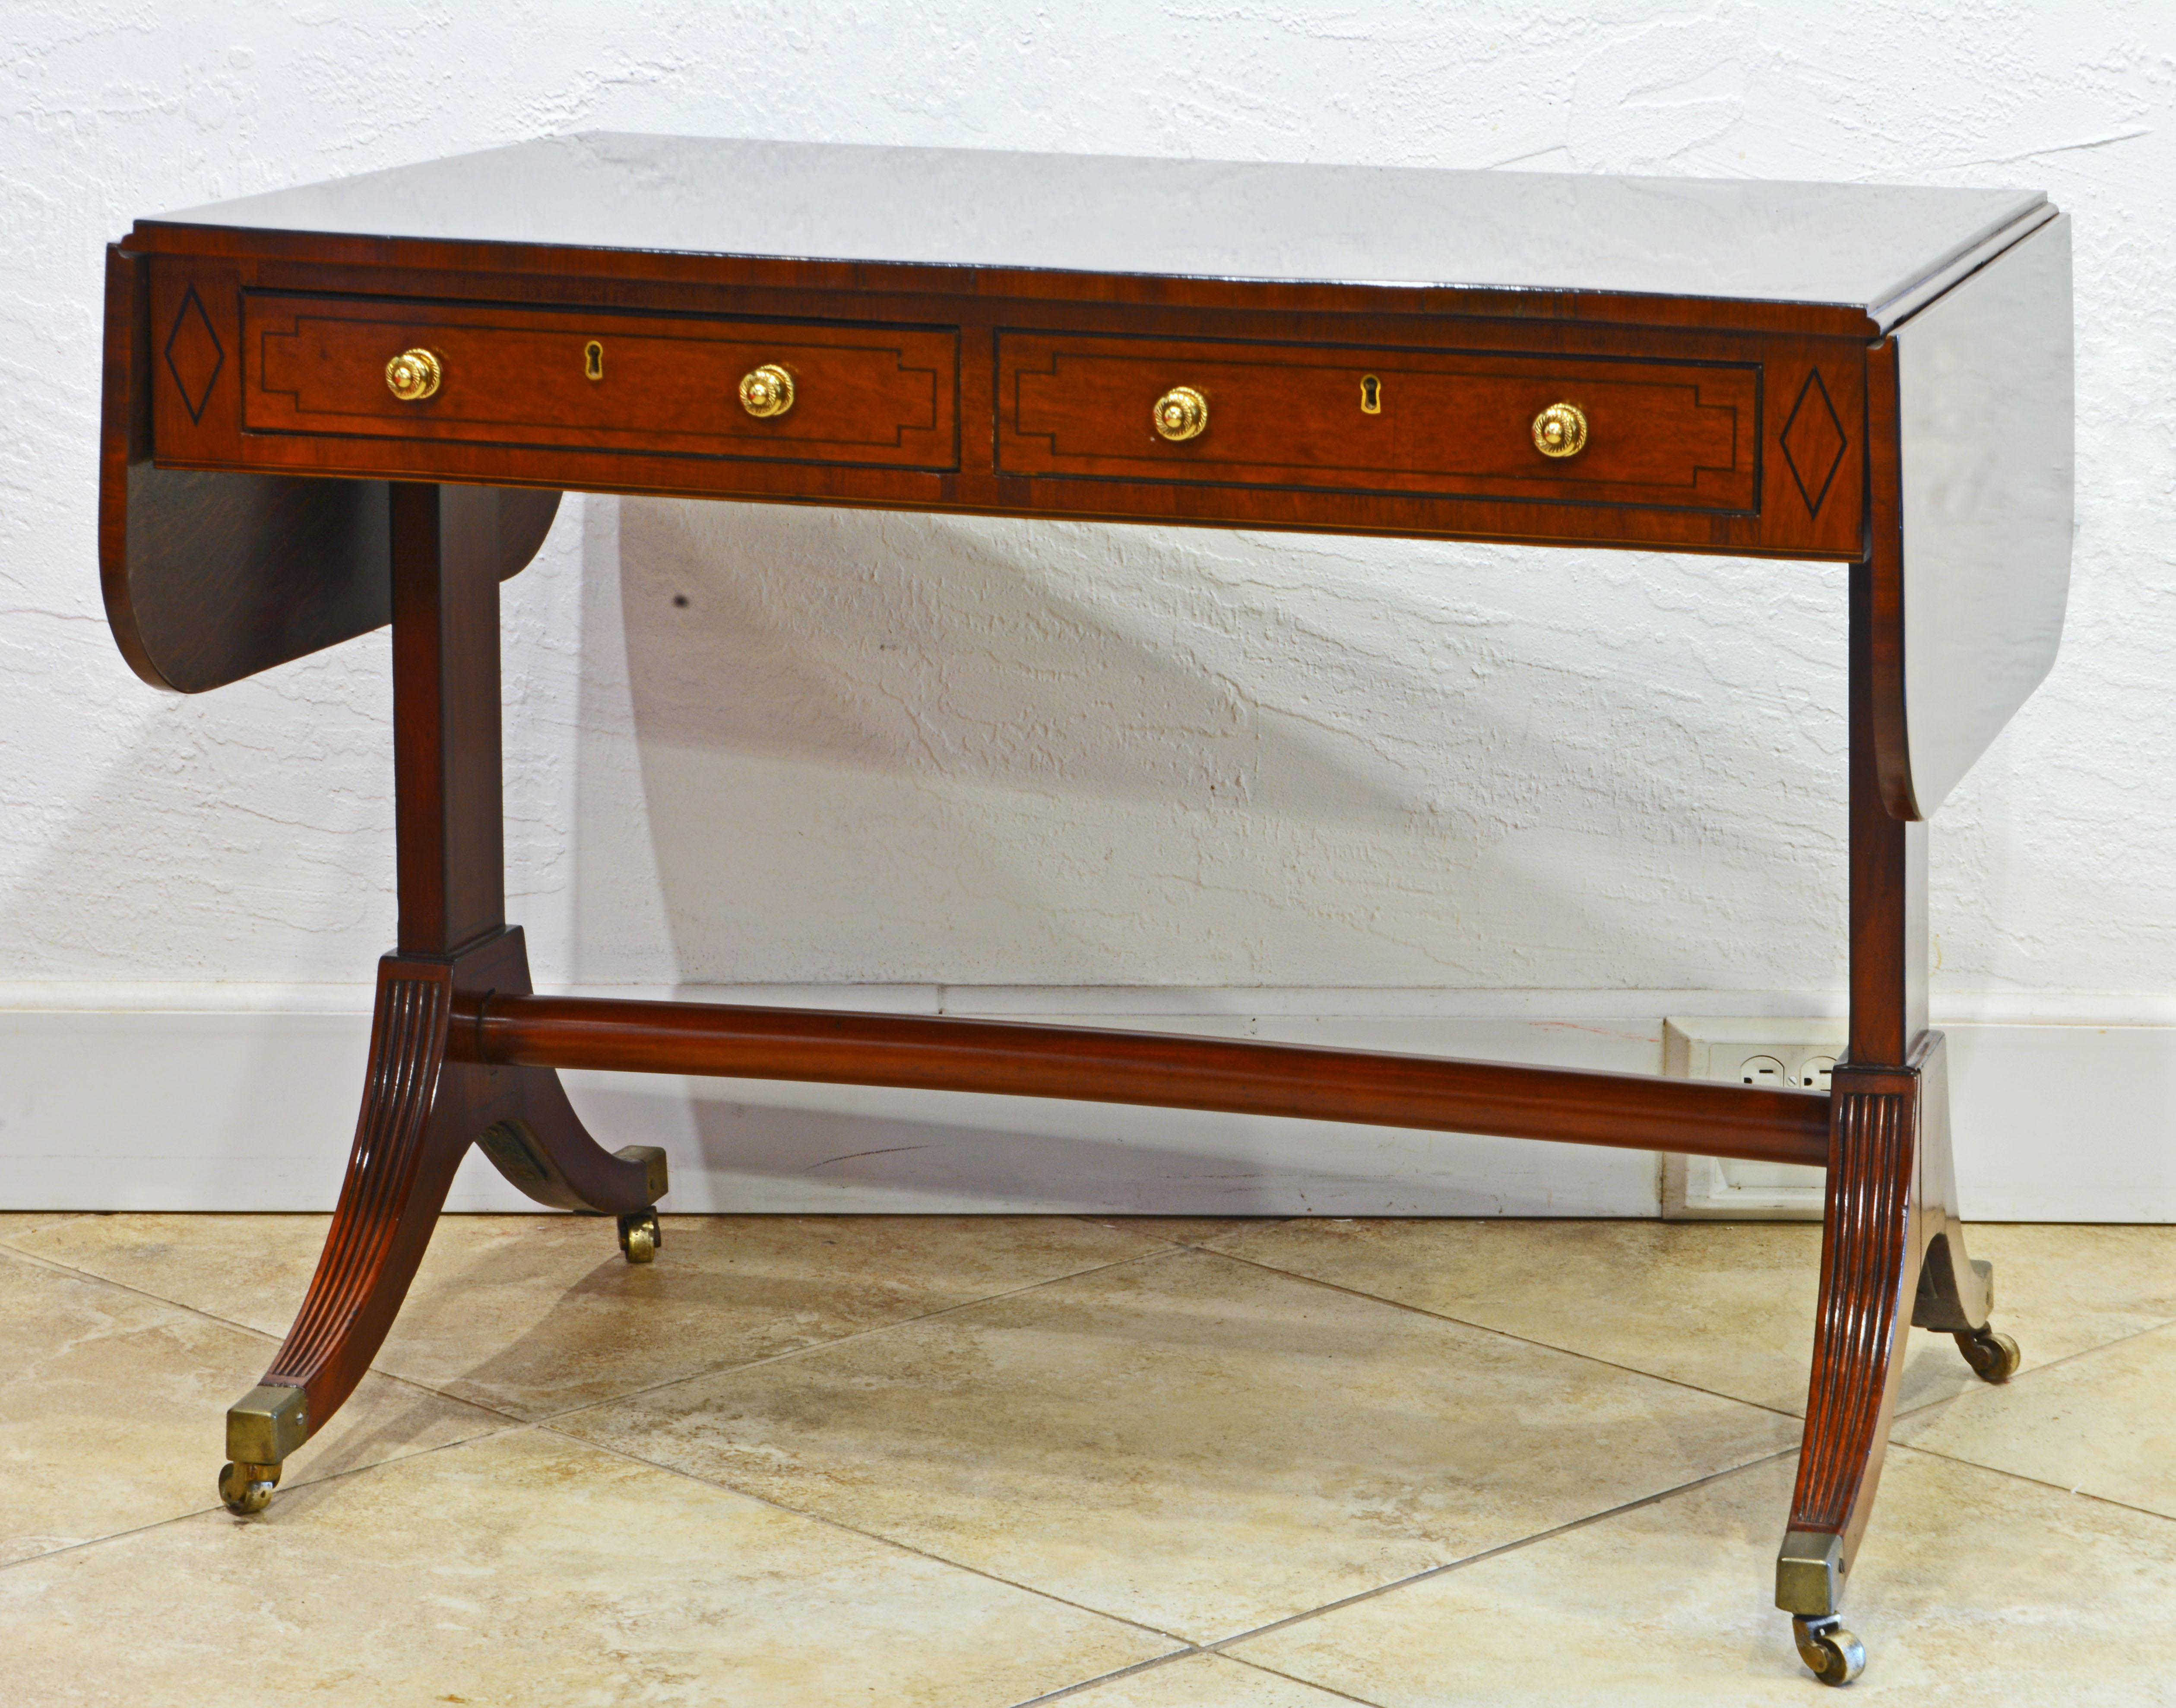 This distinguished English George III mahogany sofa table dating to around 1830 features a polished top and two drop leaves that can be lifted and supported to make the table longer. Under the top there are two drawers on one side and two simulated